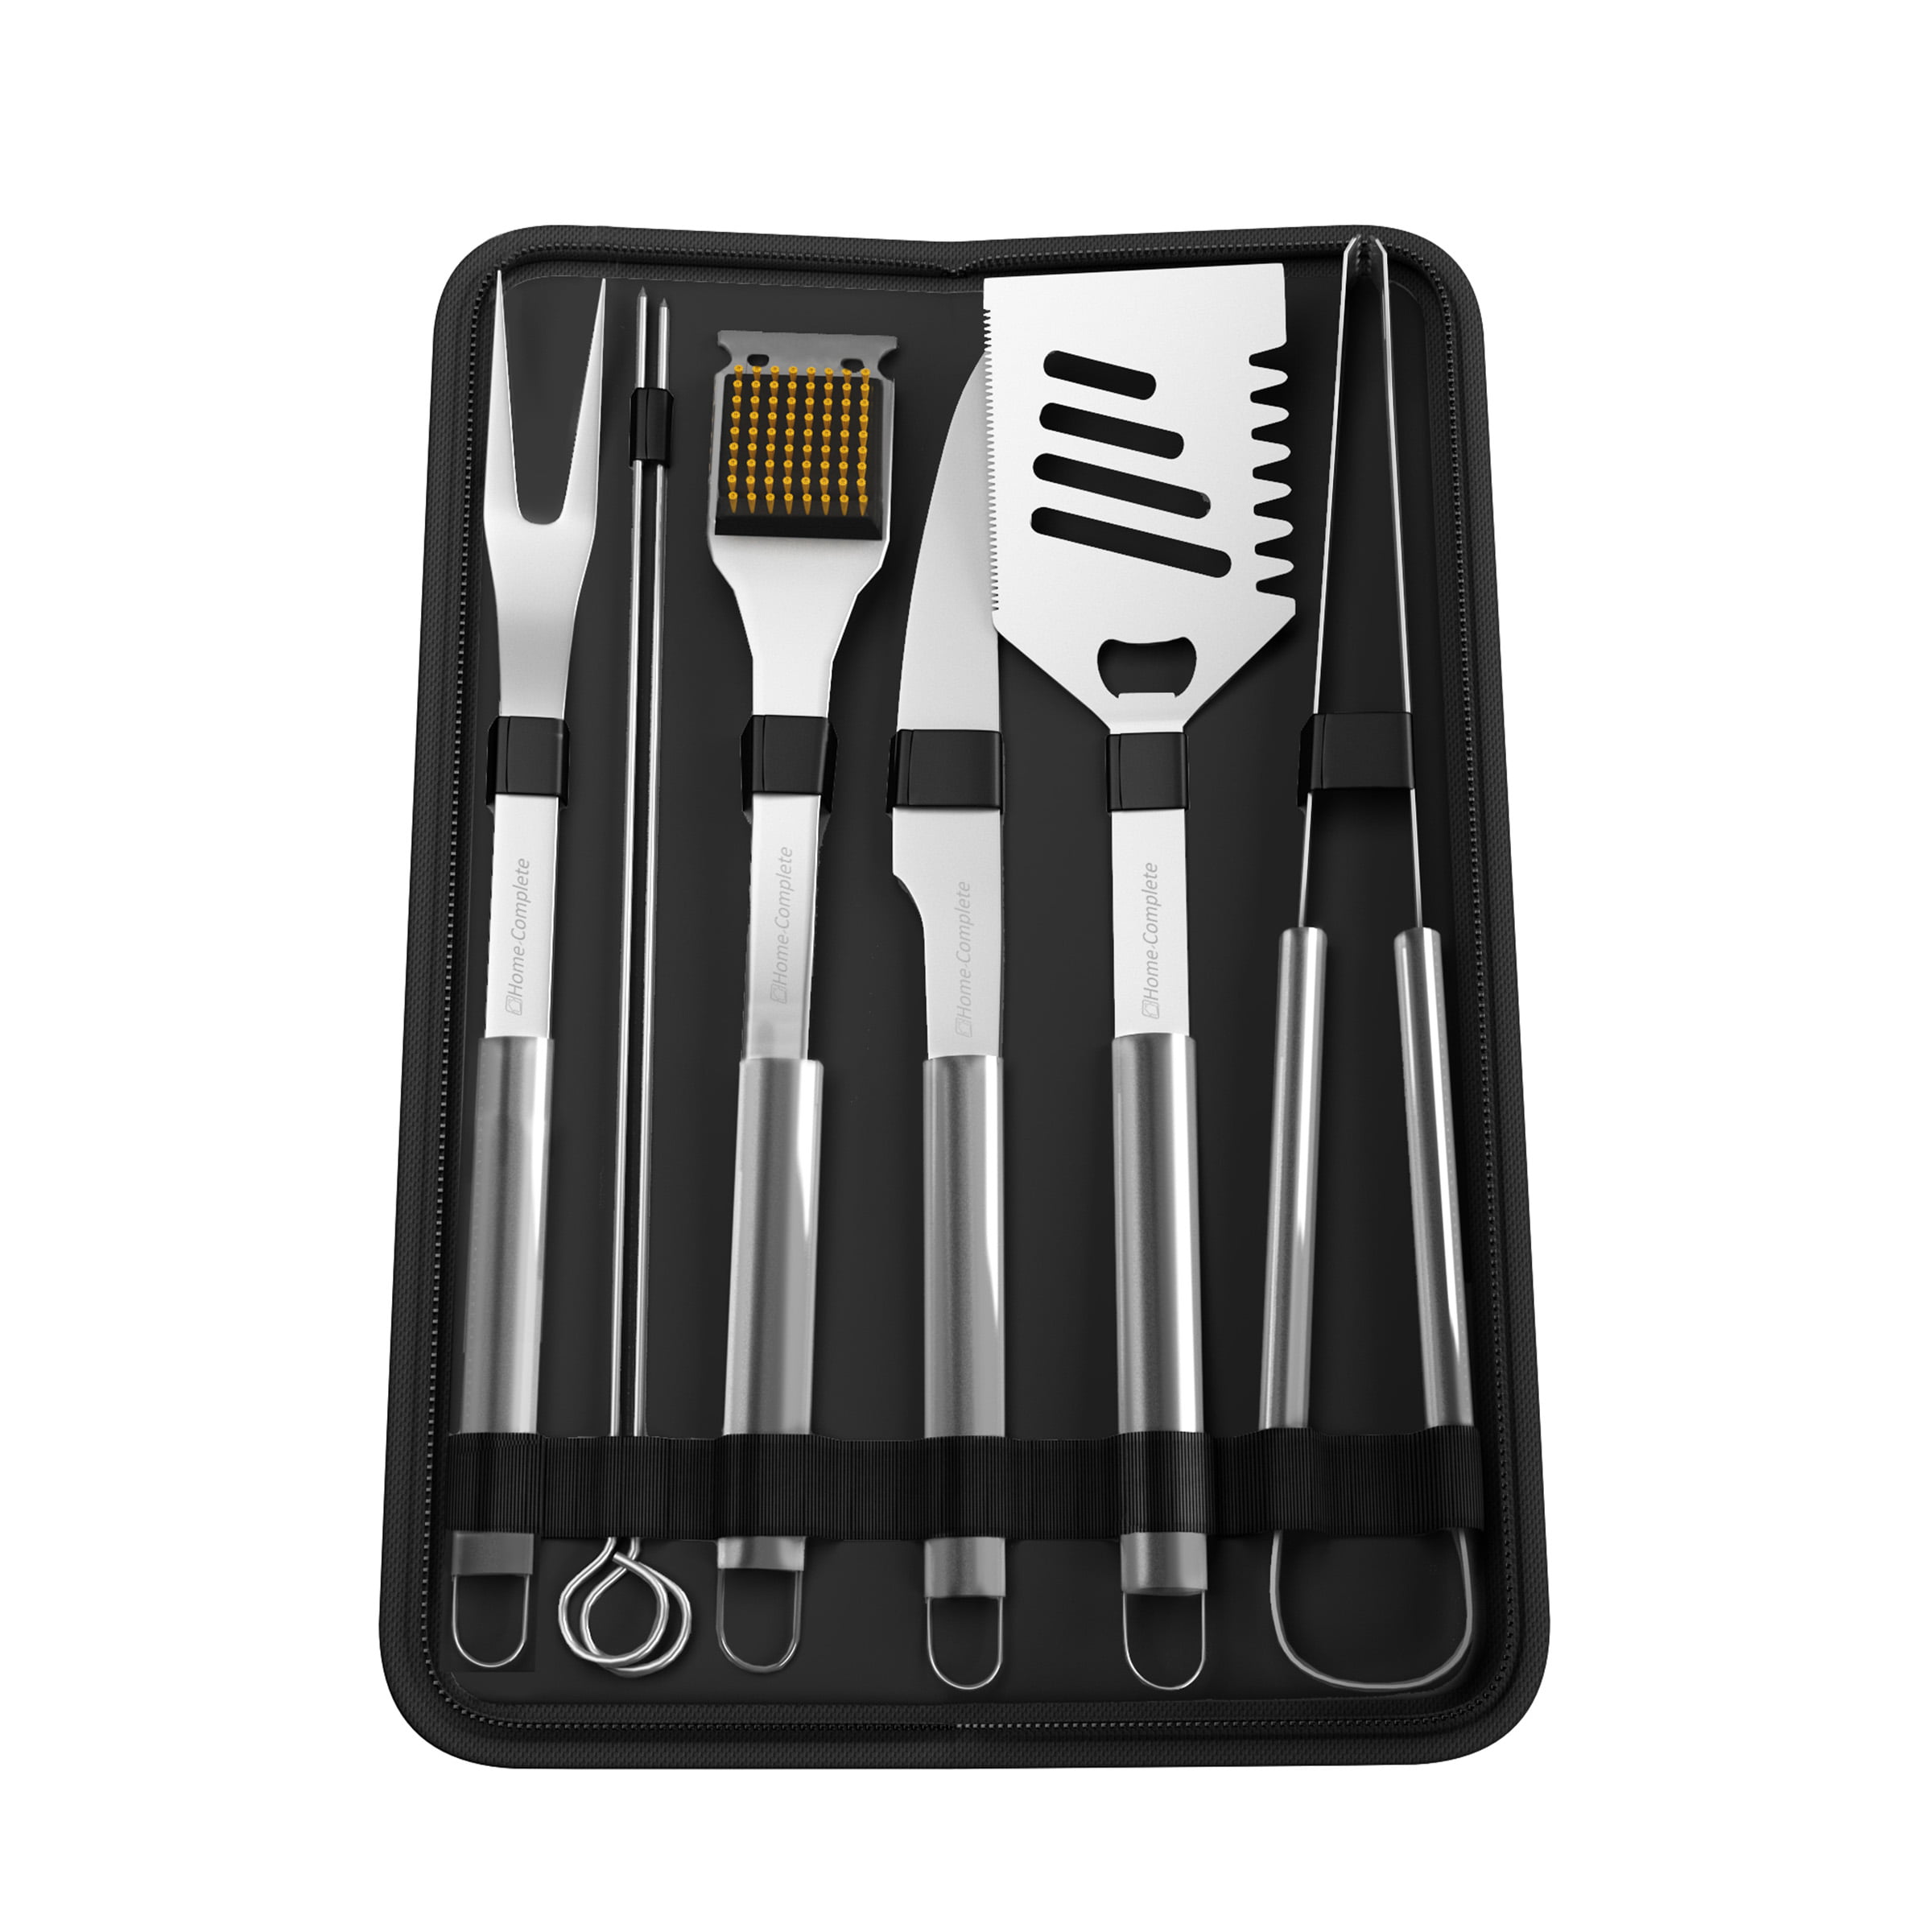  Home-Complete 4326466051 BBQ Grill Tools Set with Wood Handles  & Knives Set-22 Pc Stainless Steel Barbecue Accessories with Wooden  Handles, Case,4 Steak Knives, Spatula, Tongs : Everything Else